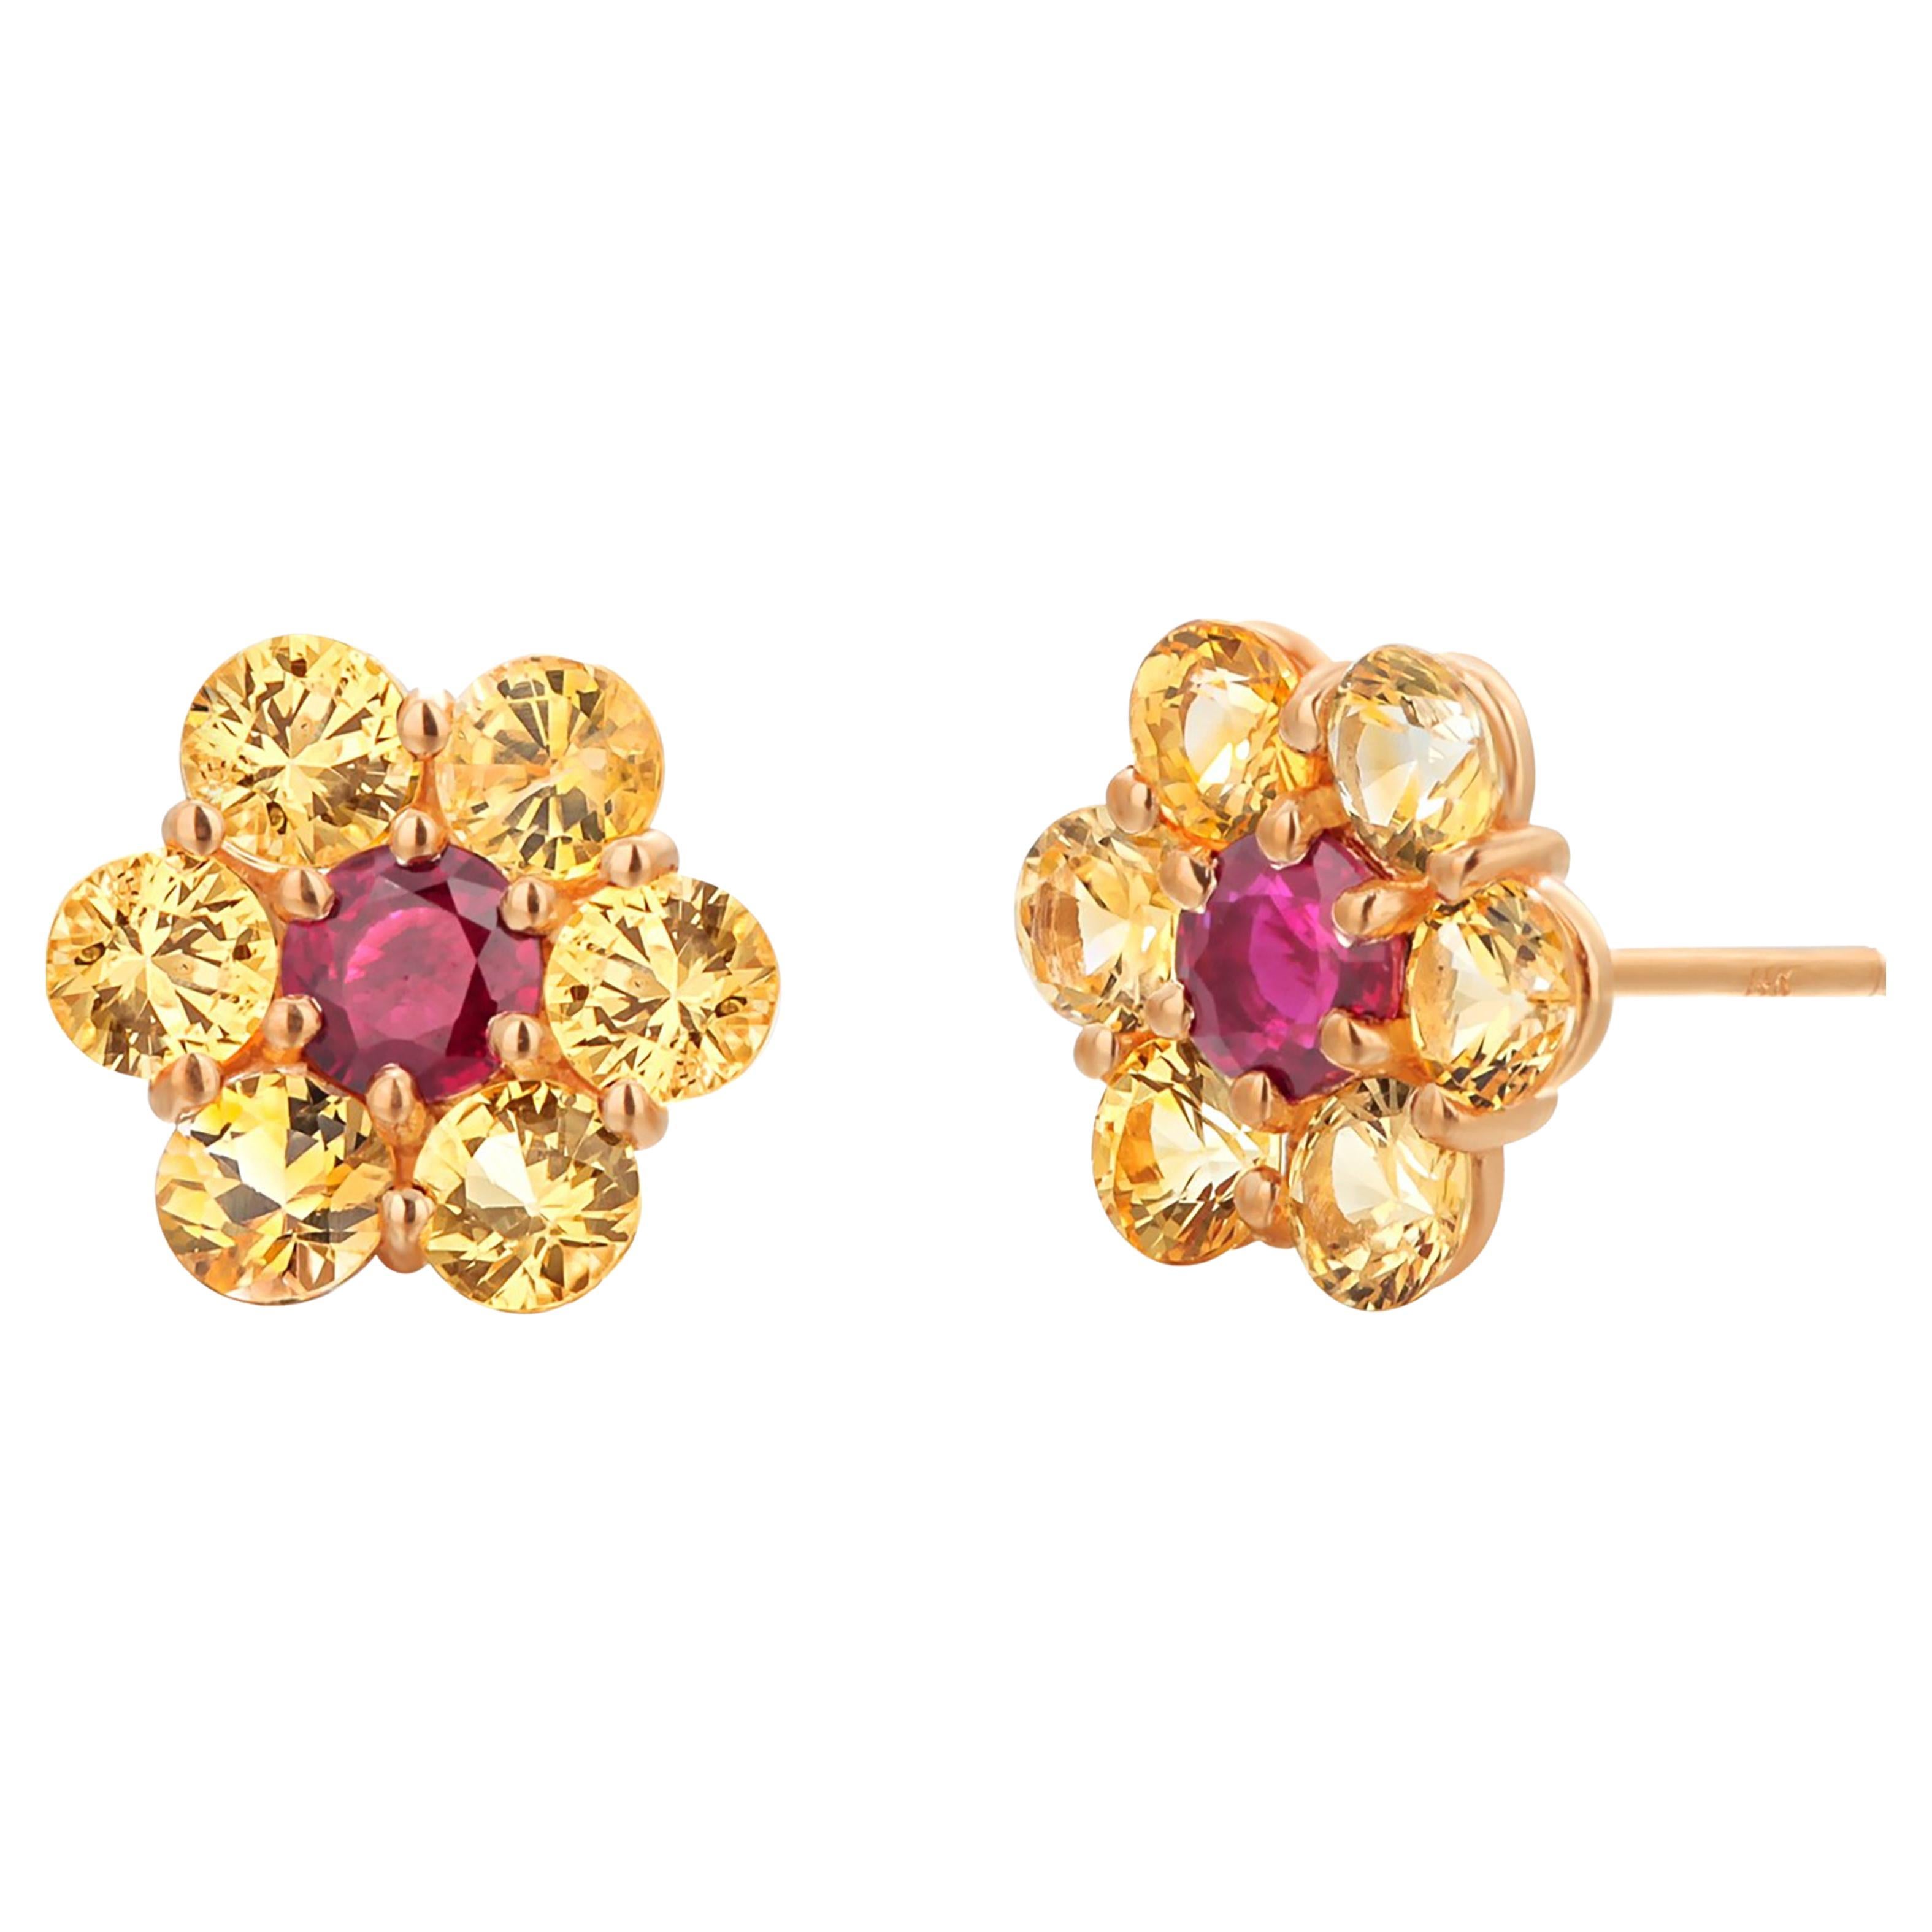 14 Karat Yellow Gold Floral Stud Earrings Yellow Ceylon Sapphires Ruby 0.35 Inch For Sale